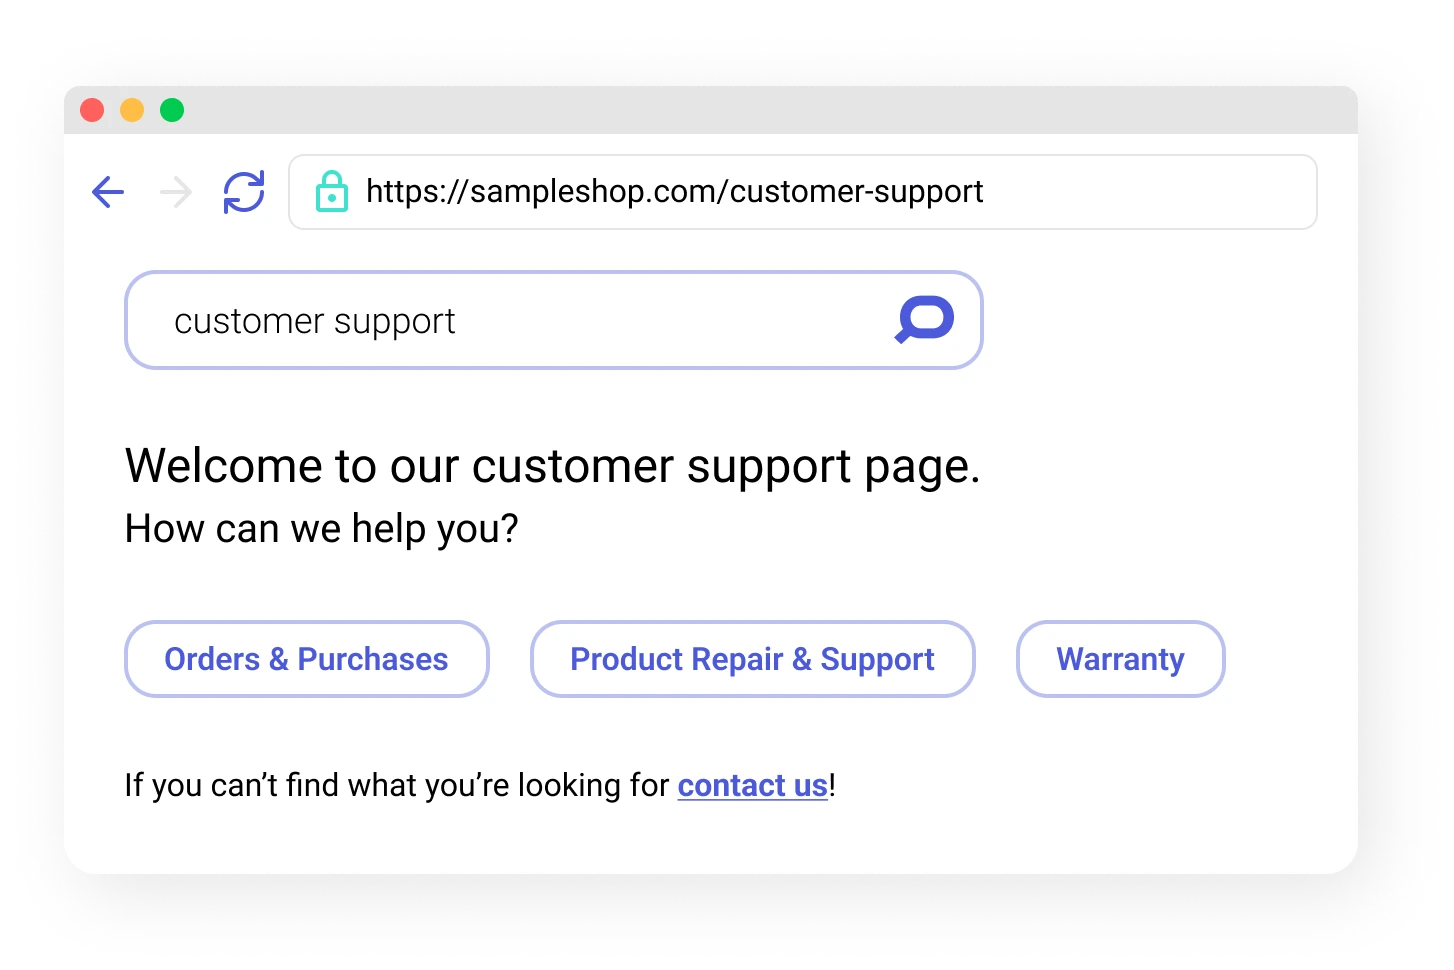 Redirec Rules feature redirect shoppers to informational pages instead of product pages when queries are information-based.